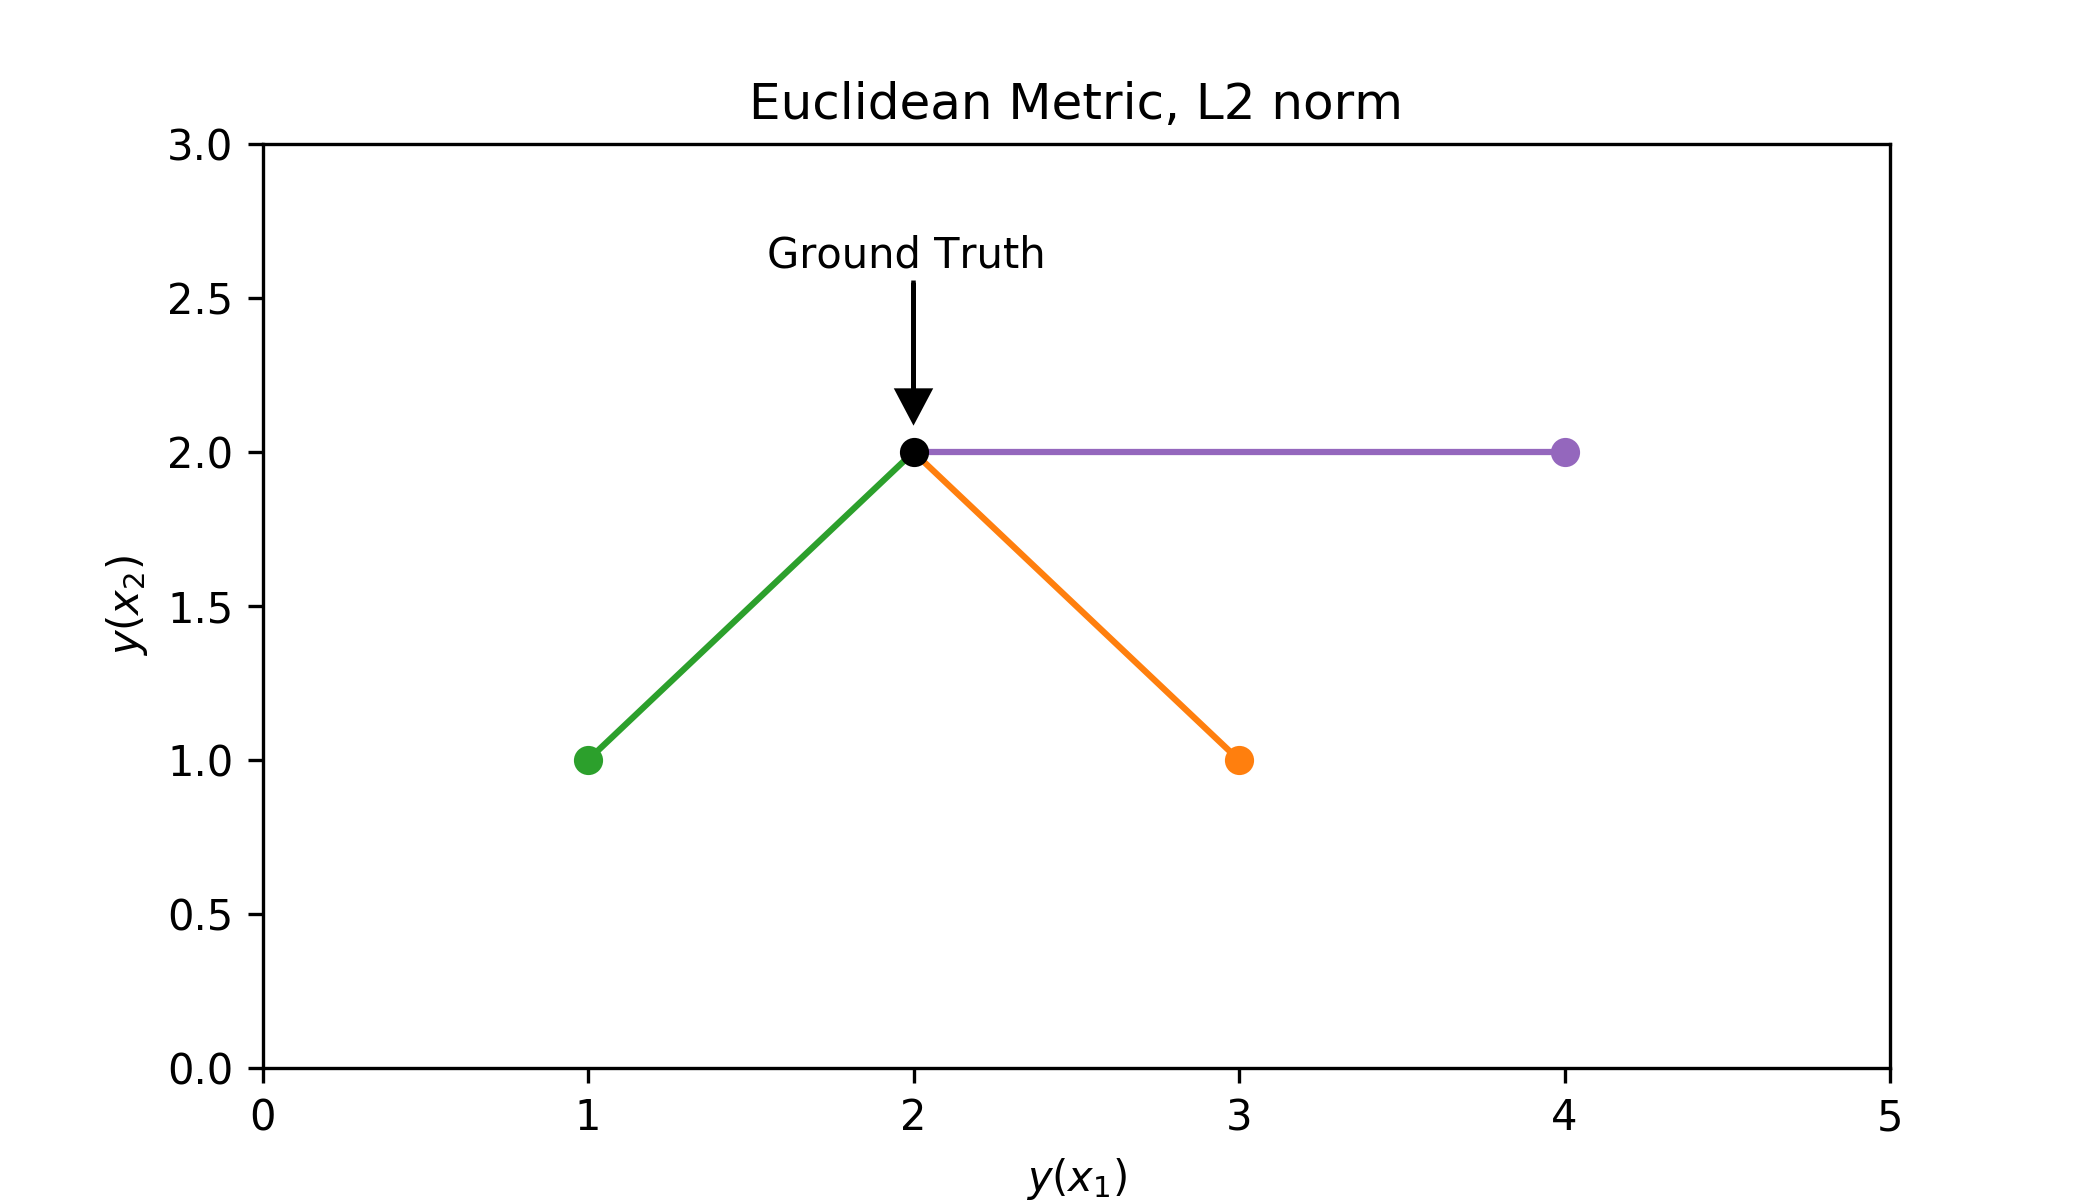 Measure of distance between the ground truth and models using the euclidean metric